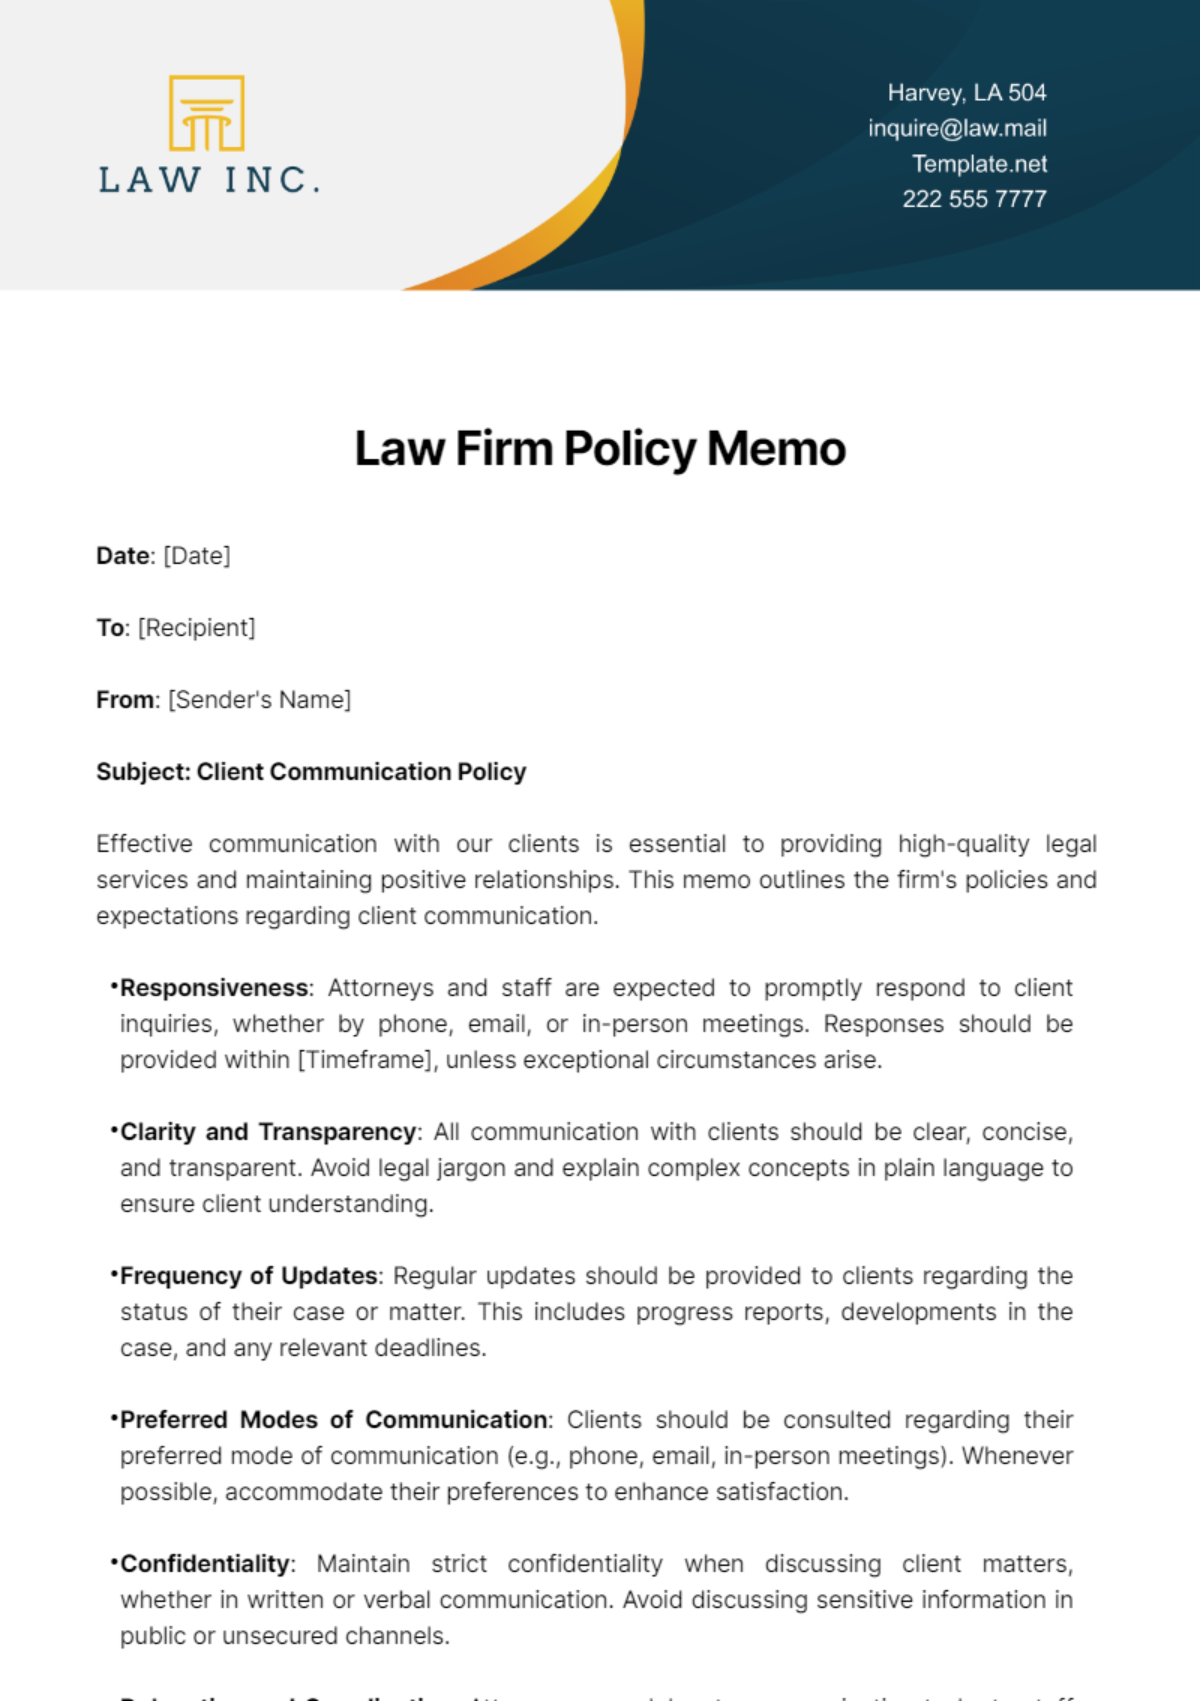 Free Law Firm Policy Memo Template